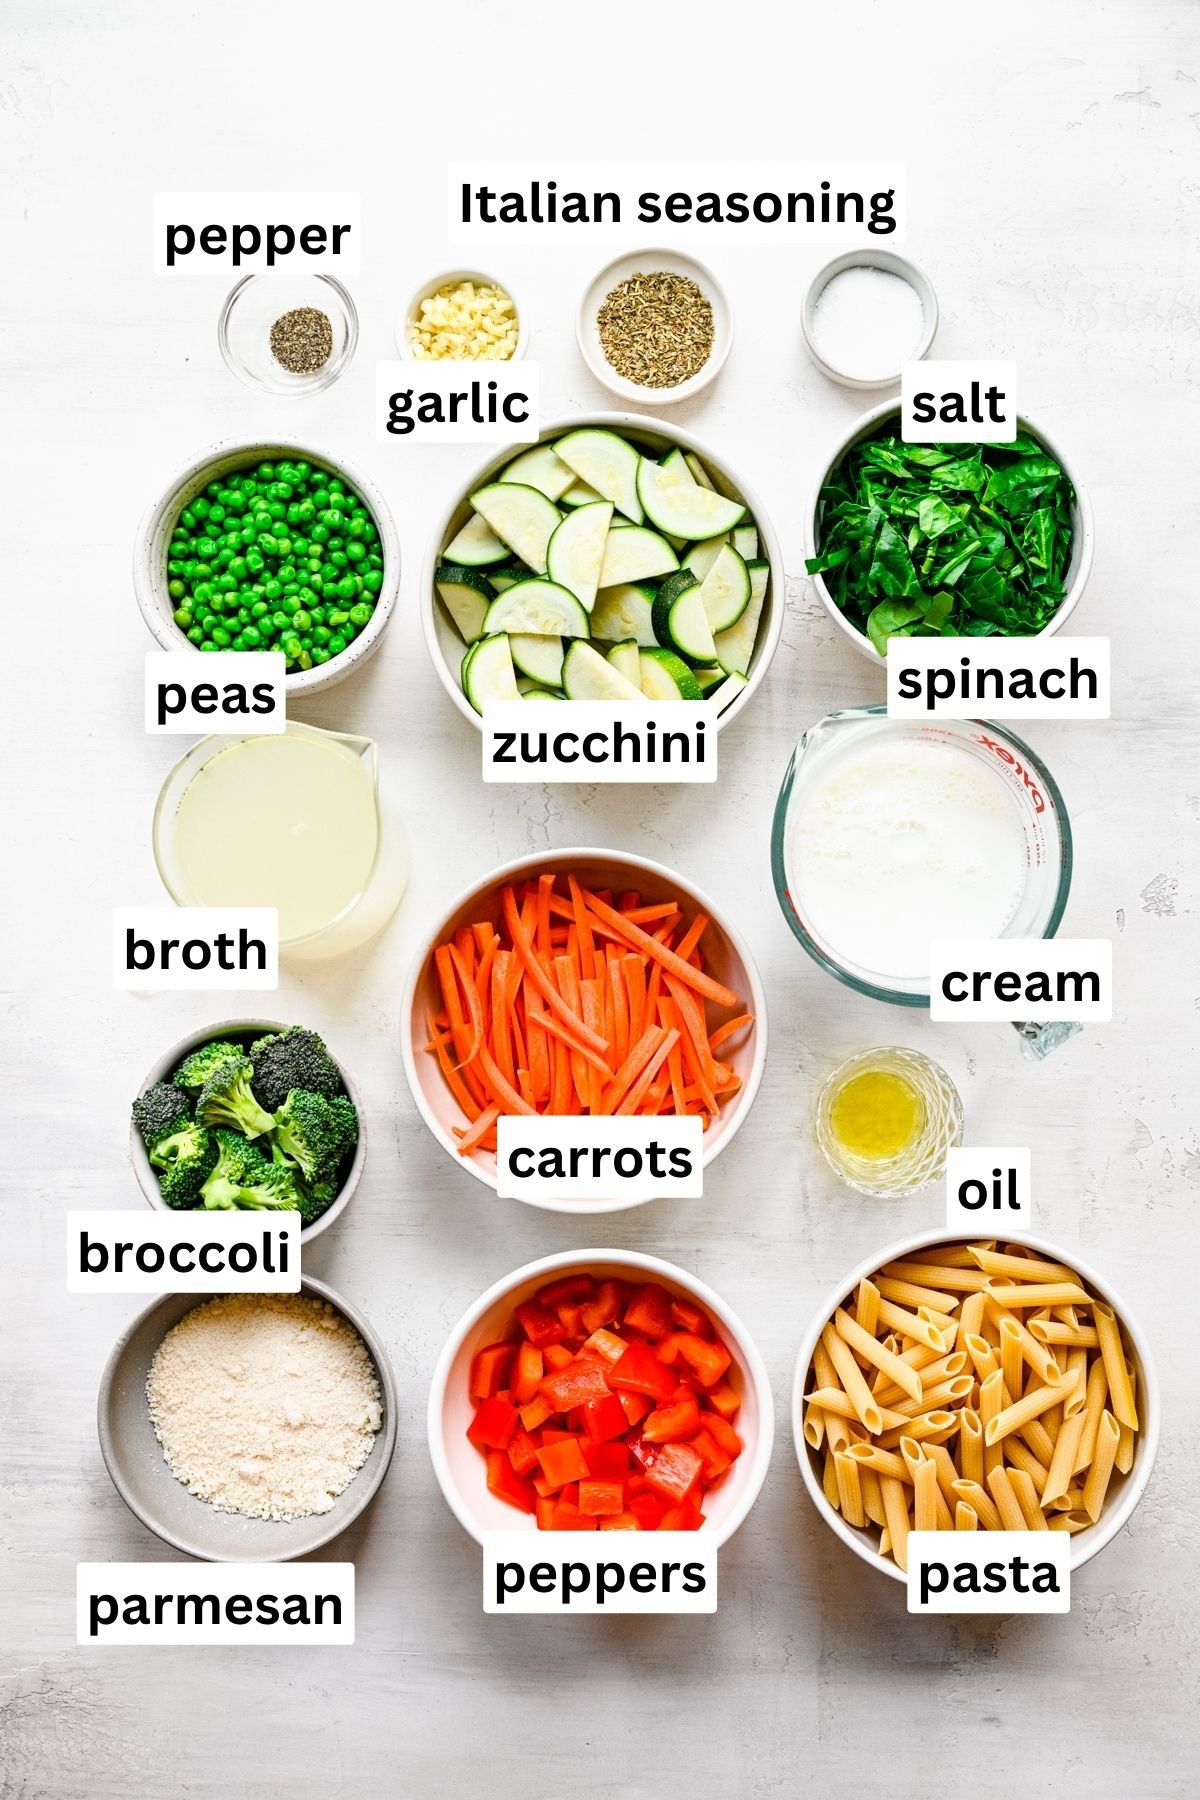 ingredients for pasta primavera in bowls on grey surface.